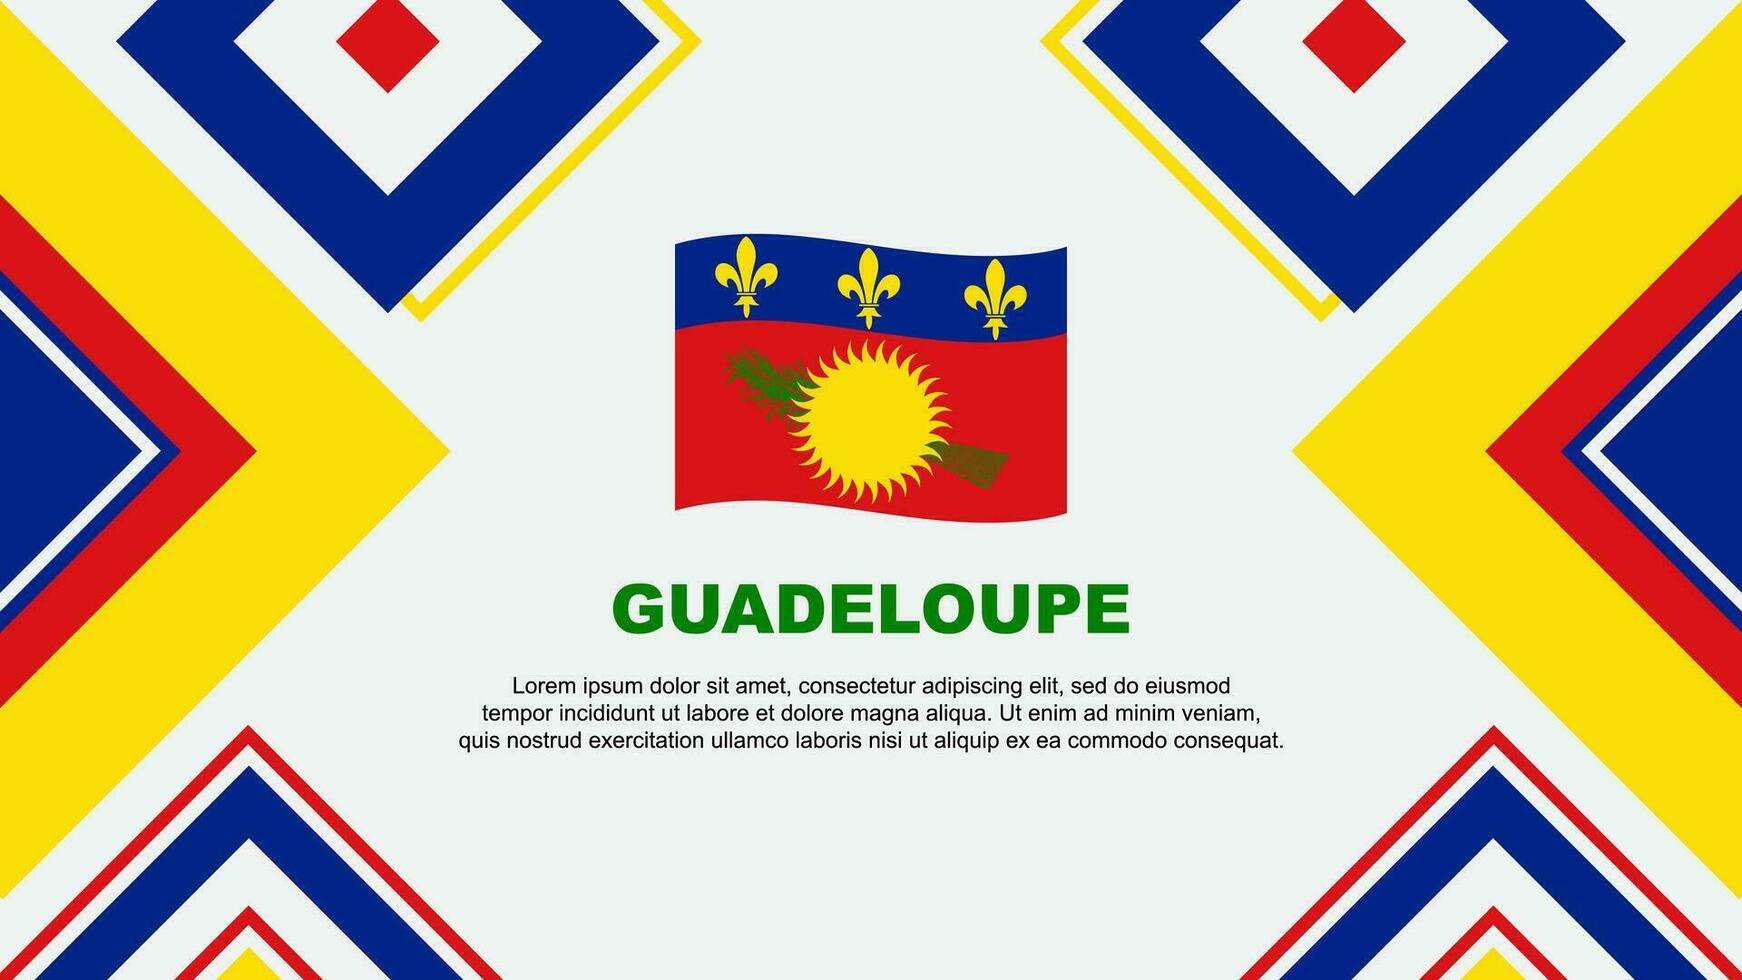 Guadeloupe Flag Abstract Background Design Template. Guadeloupe Independence Day Banner Wallpaper Vector Illustration. Guadeloupe Independence Day